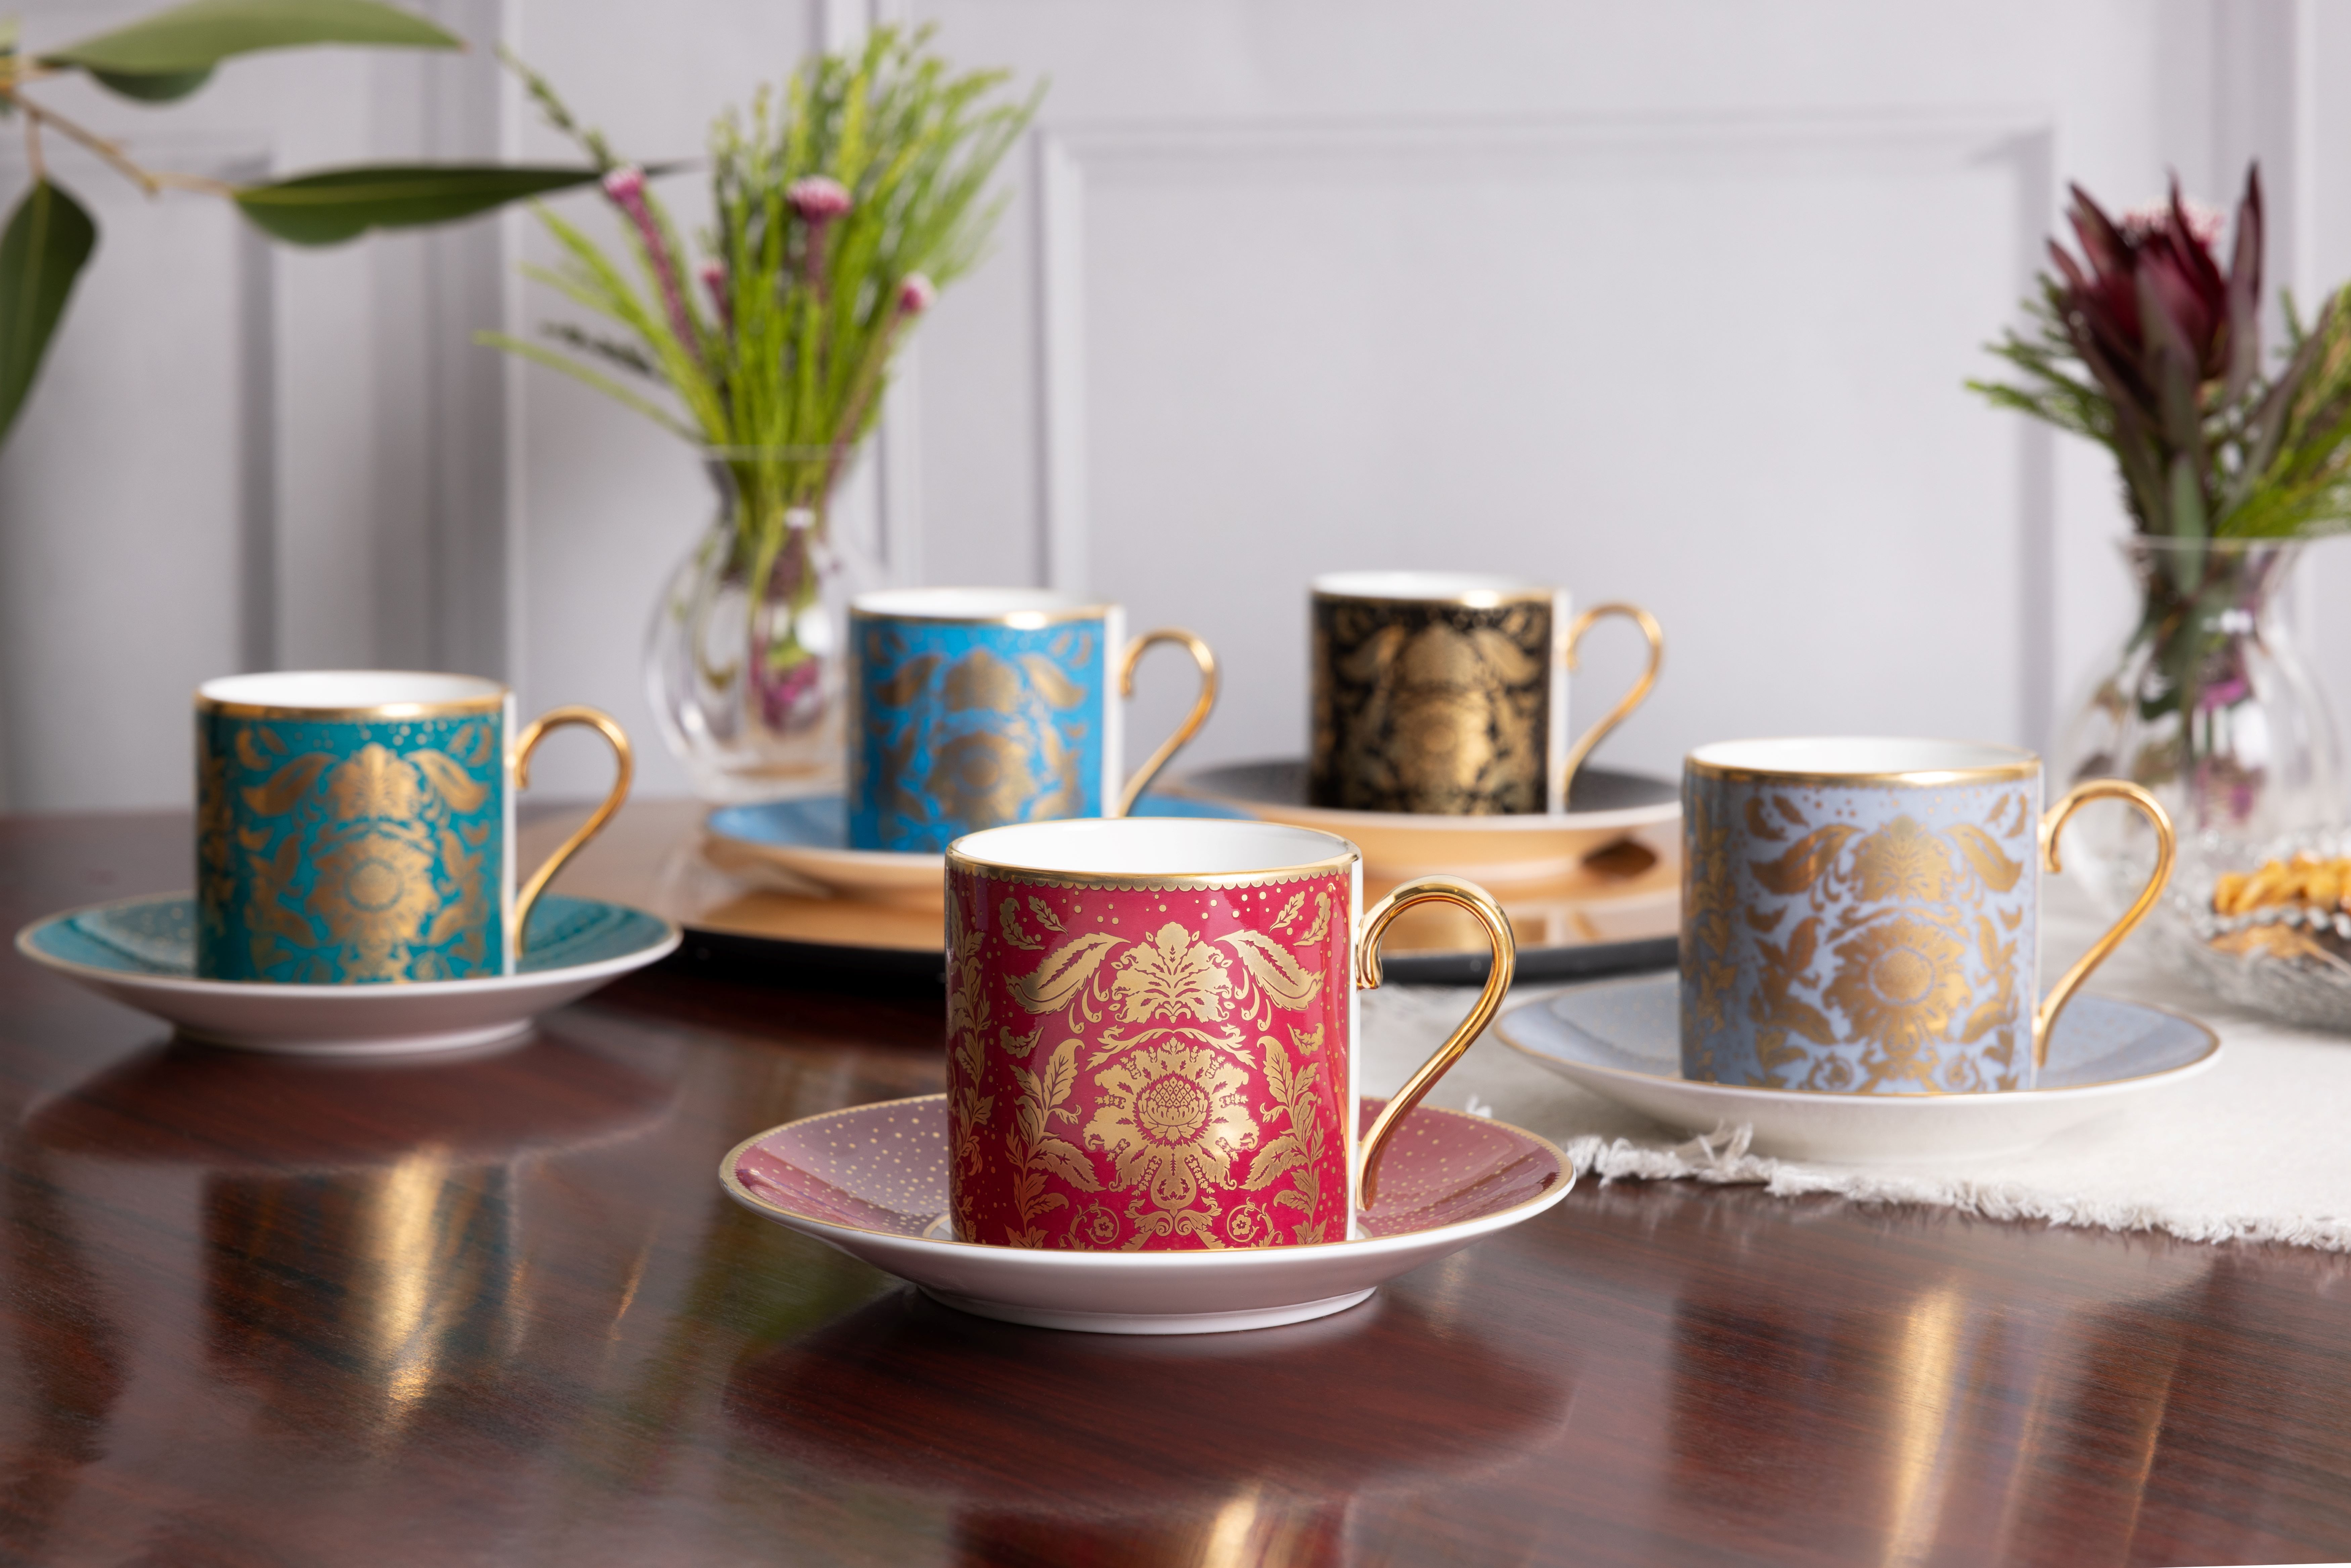 A selection of coffee cups and saucers in pink, black, teal, blue and greywhite